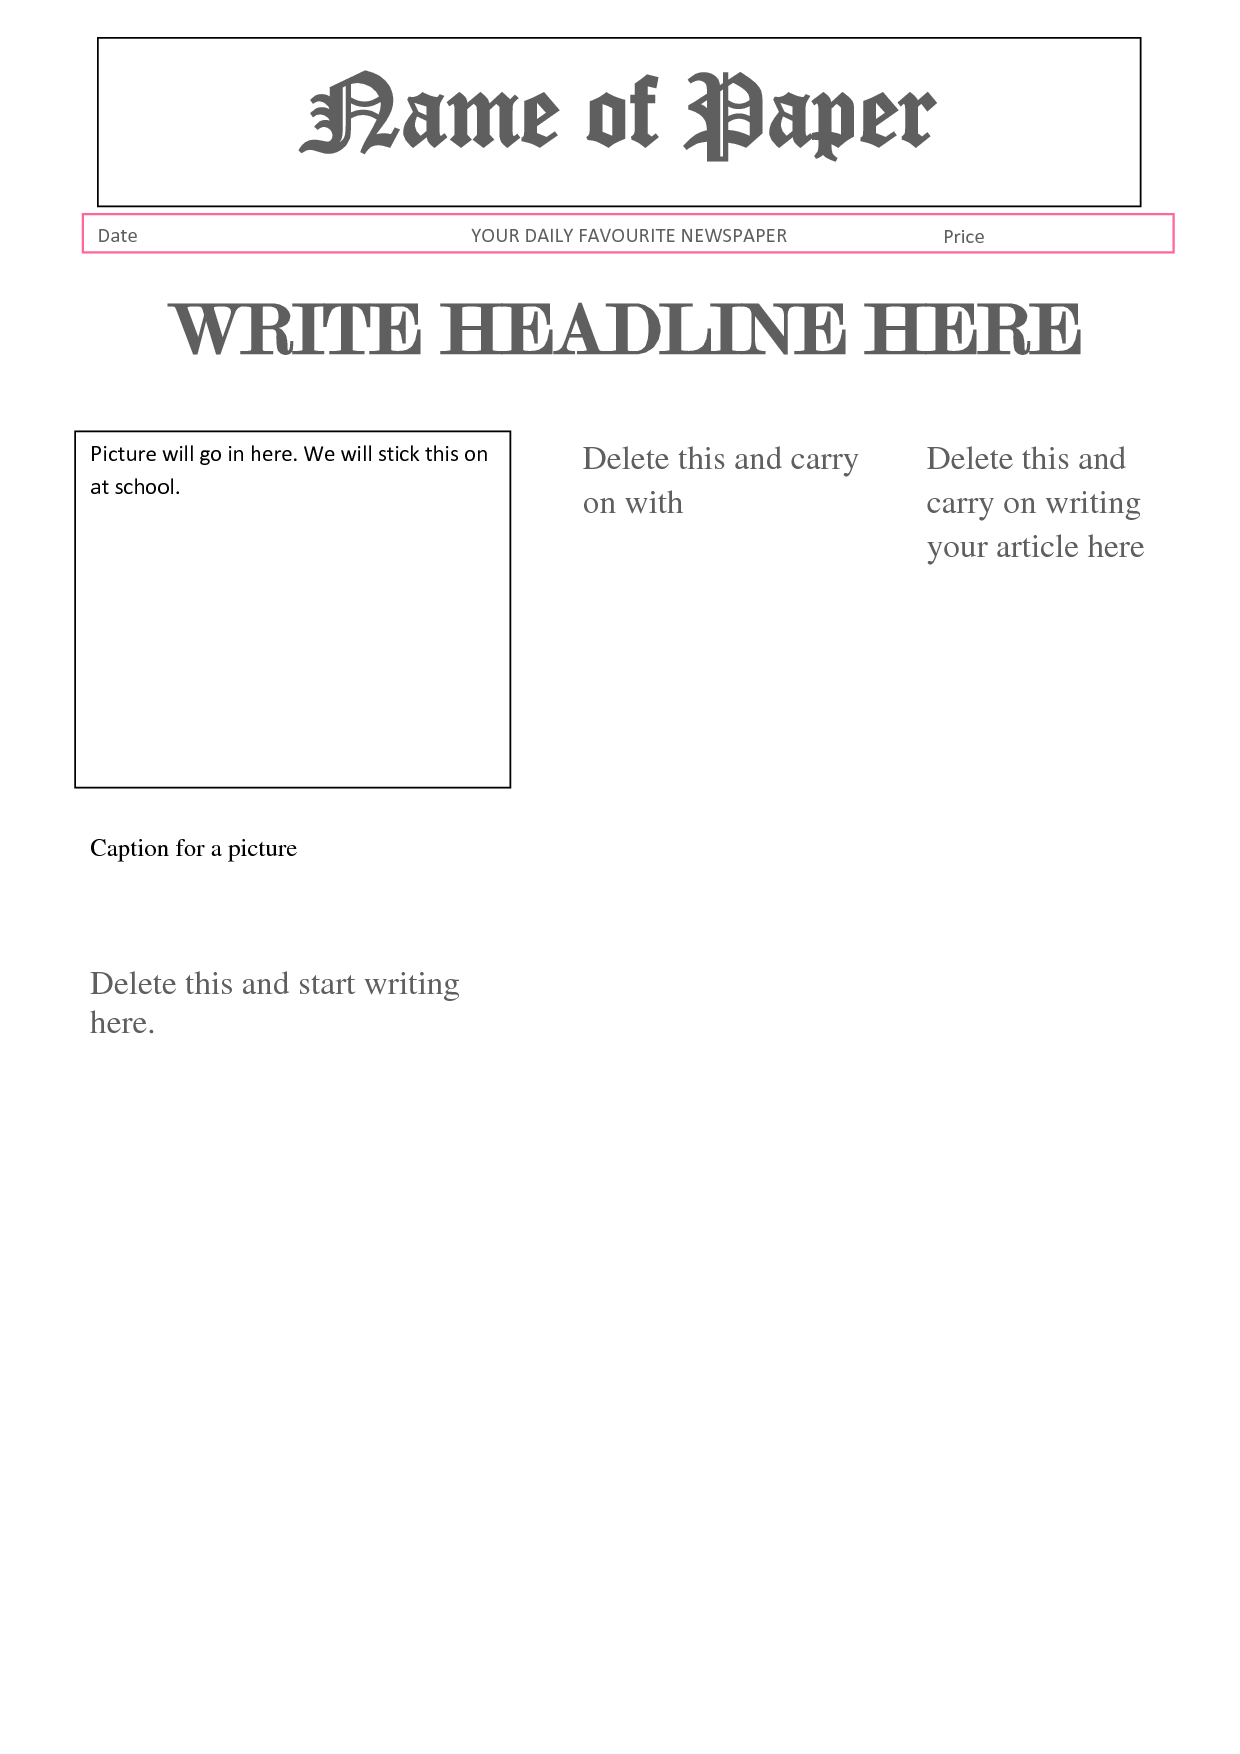 026 Newspaper Report Template 72509 Ideas Article Microsoft Intended For News Report Template